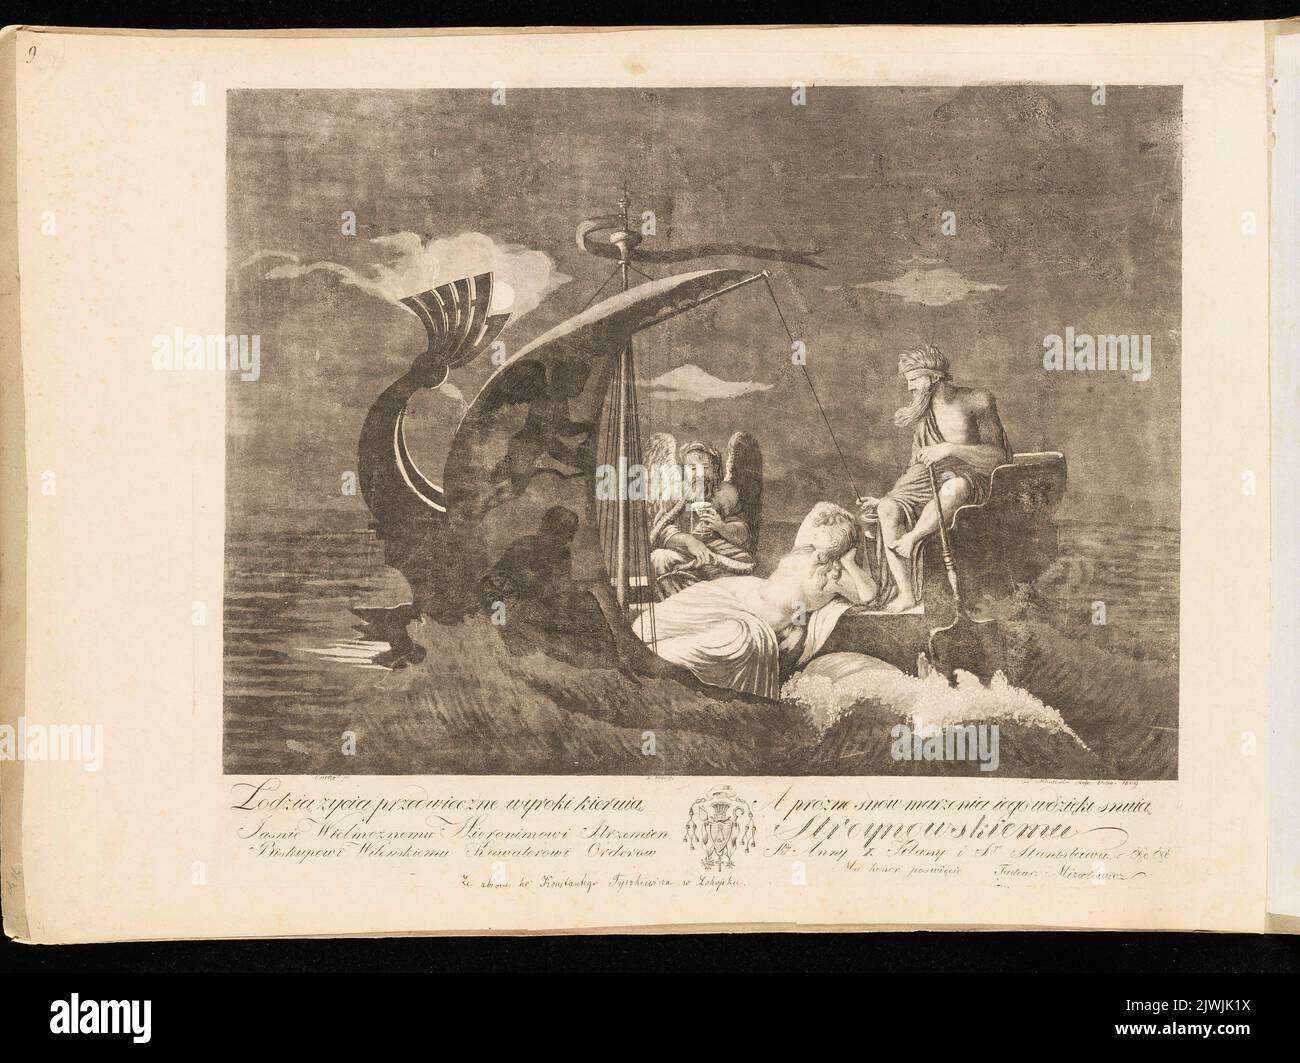 Allegorical composition: ‘The boat of life is steered by eternal judgements. And futile are the dreams of life’s charms’.. Mizutowicz, Tadeusz (1778-1826), graphic artist, Marchand, Jacques (fl. 1769-ca 1845), graphic artist, Weiss, Isidor (1774-post 1809), draughtsman, cartoonist, Caraffe, Armand Charles (1762-1822), painter Stock Photo